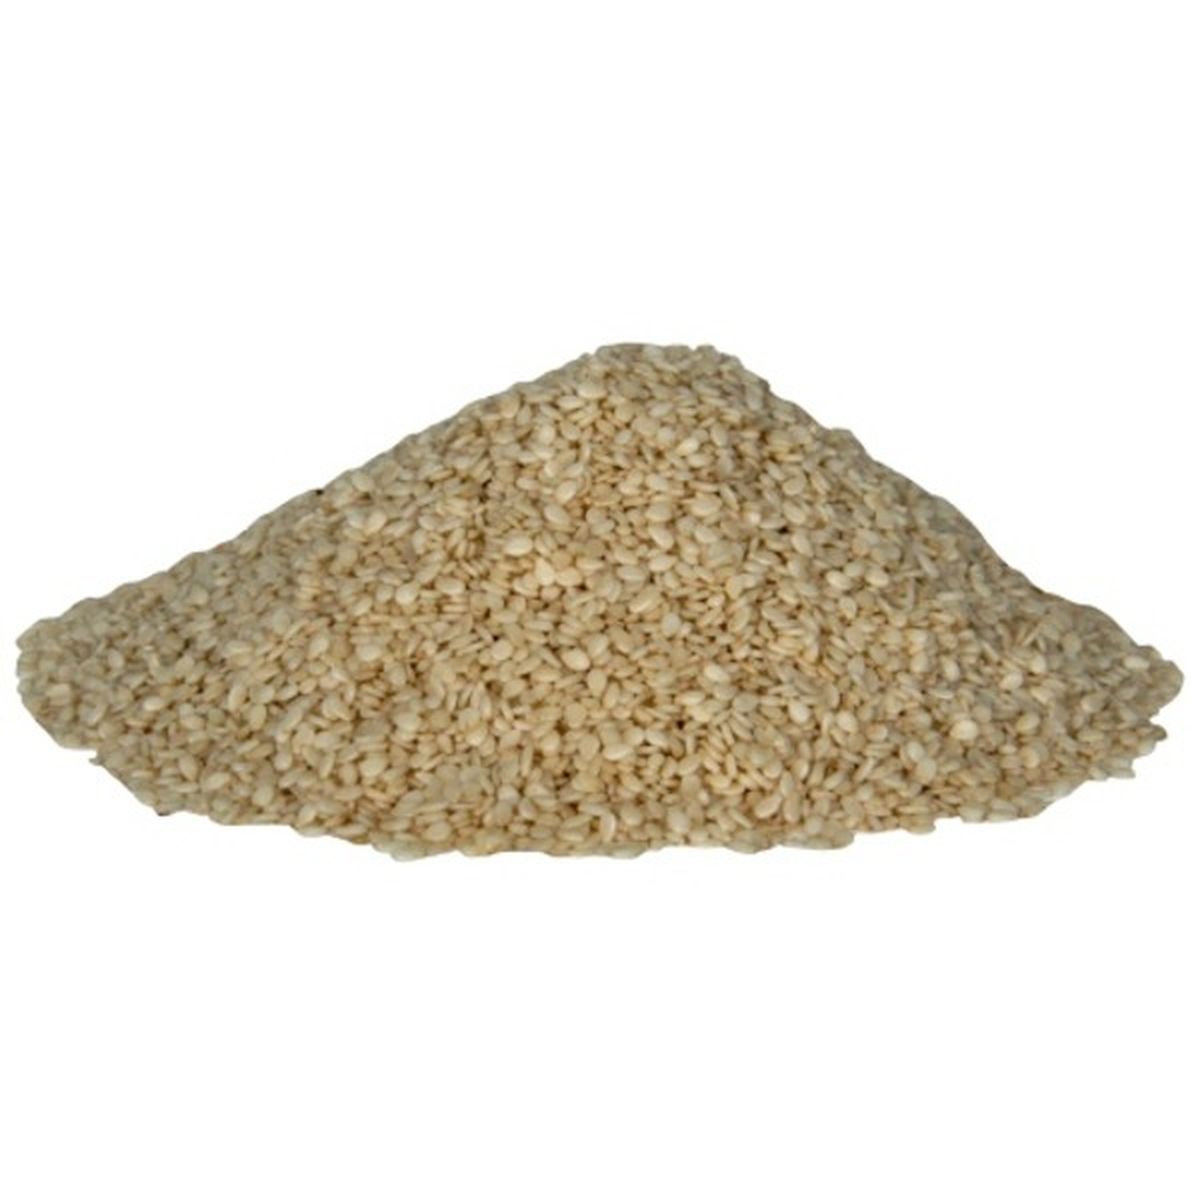 Calories in United Natural Foods Inc Organic Hulled Sesame Seeds